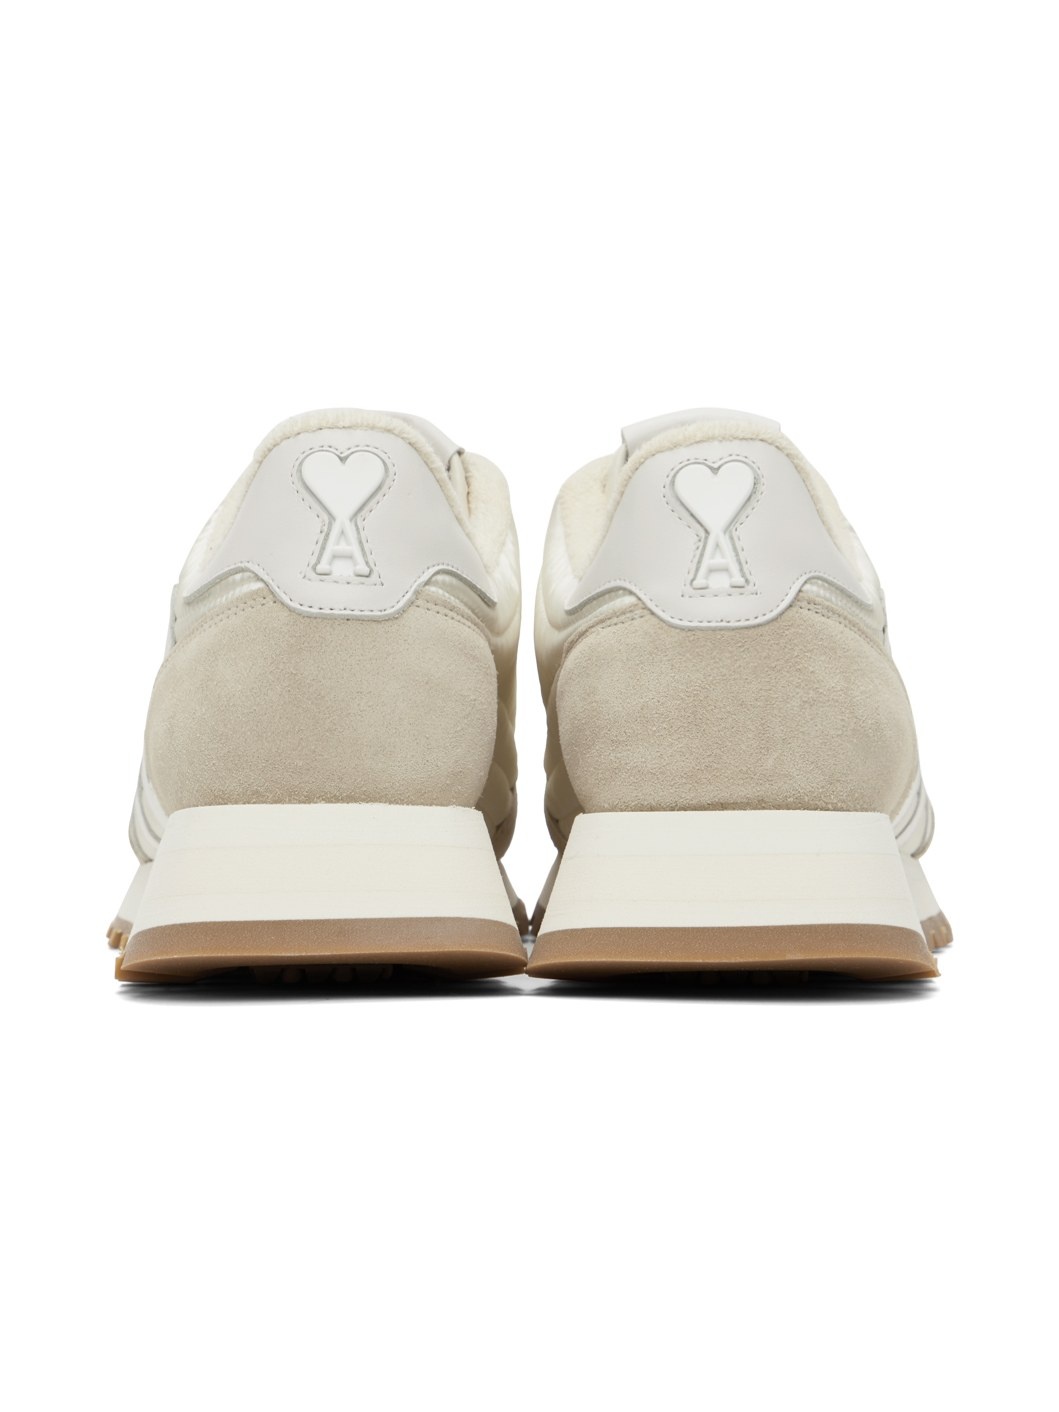 Off-White Rush Sneakers - 2